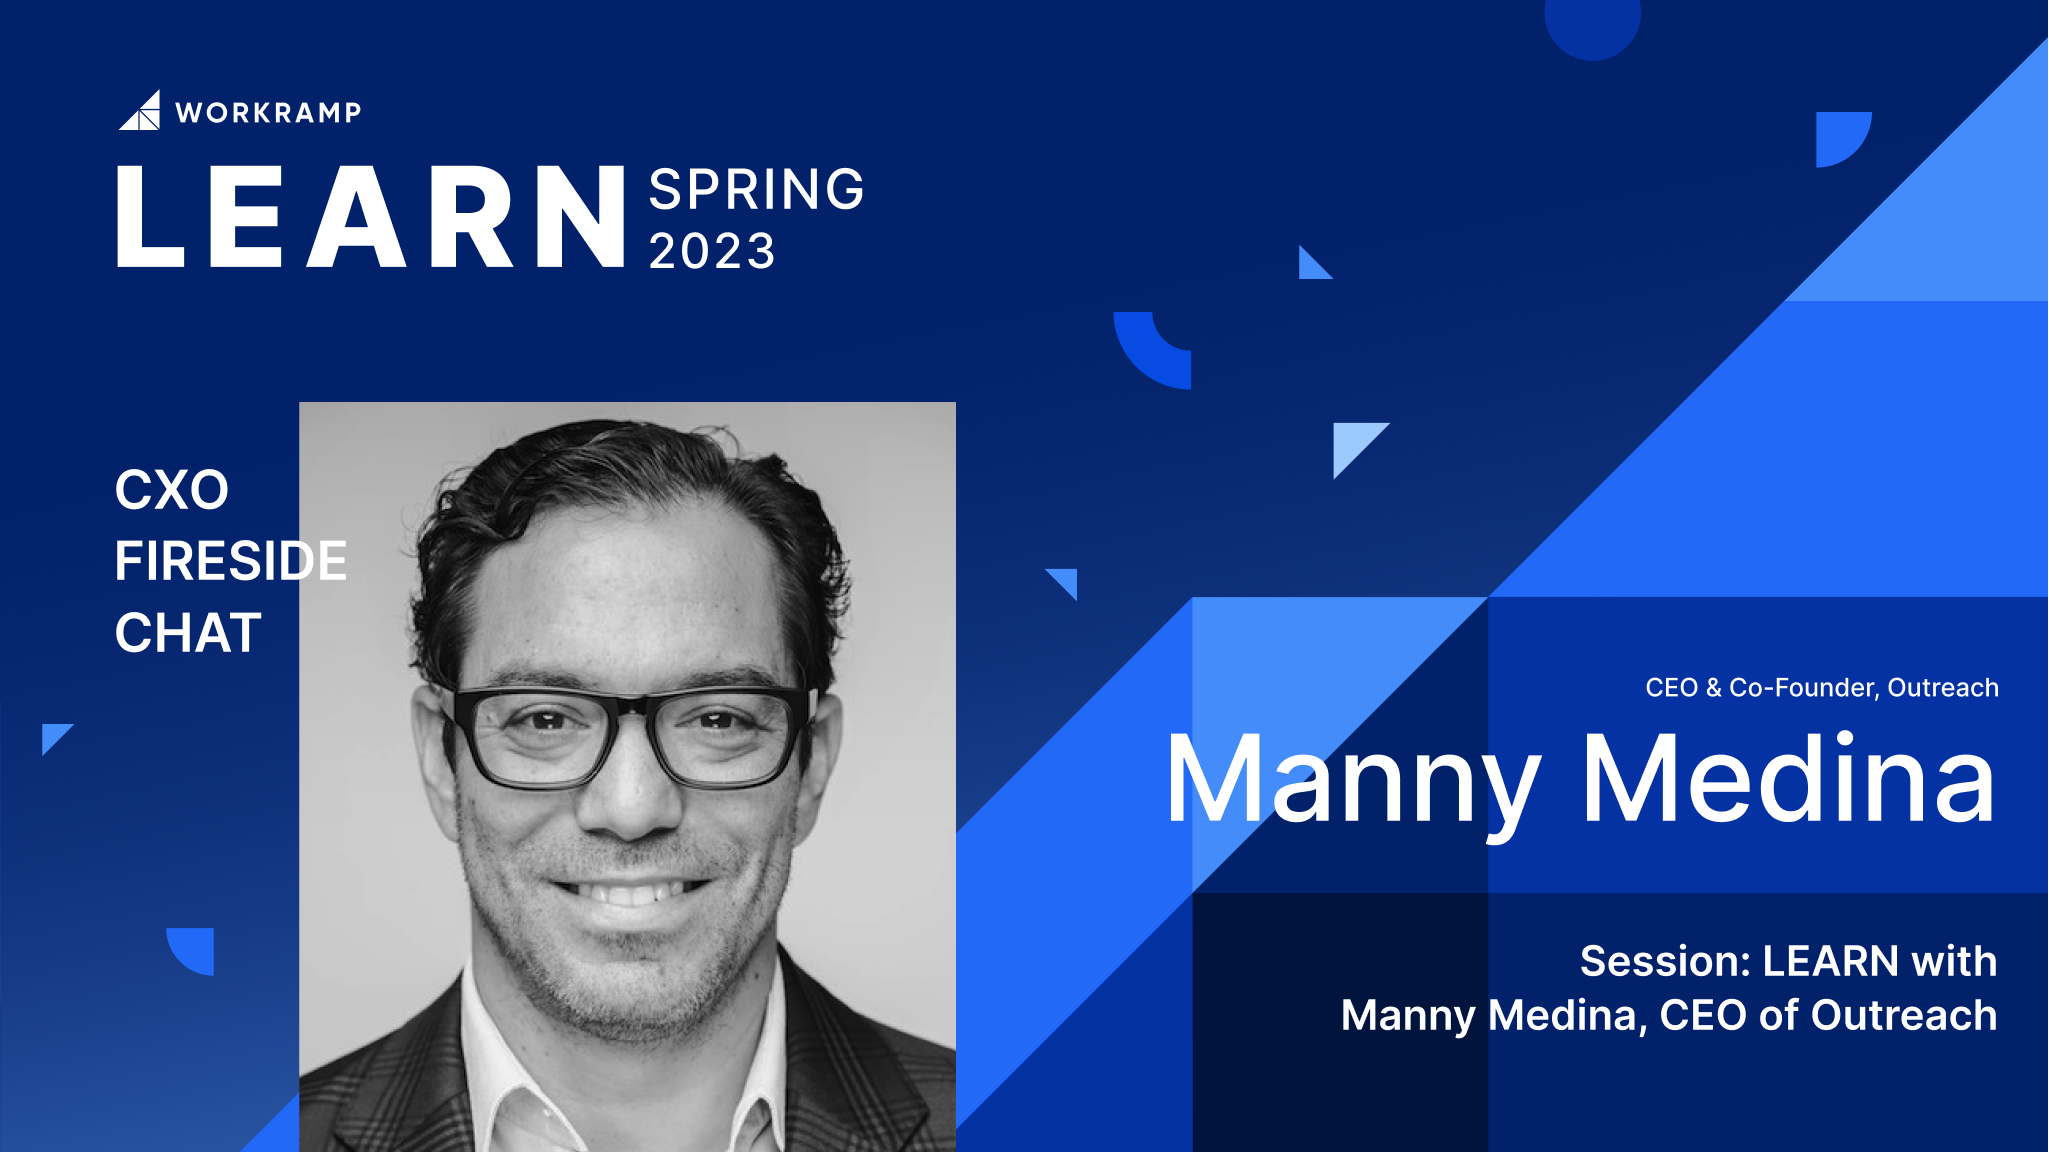 LEARN with Manny Medina, CEO and Co-Founder of Outreach